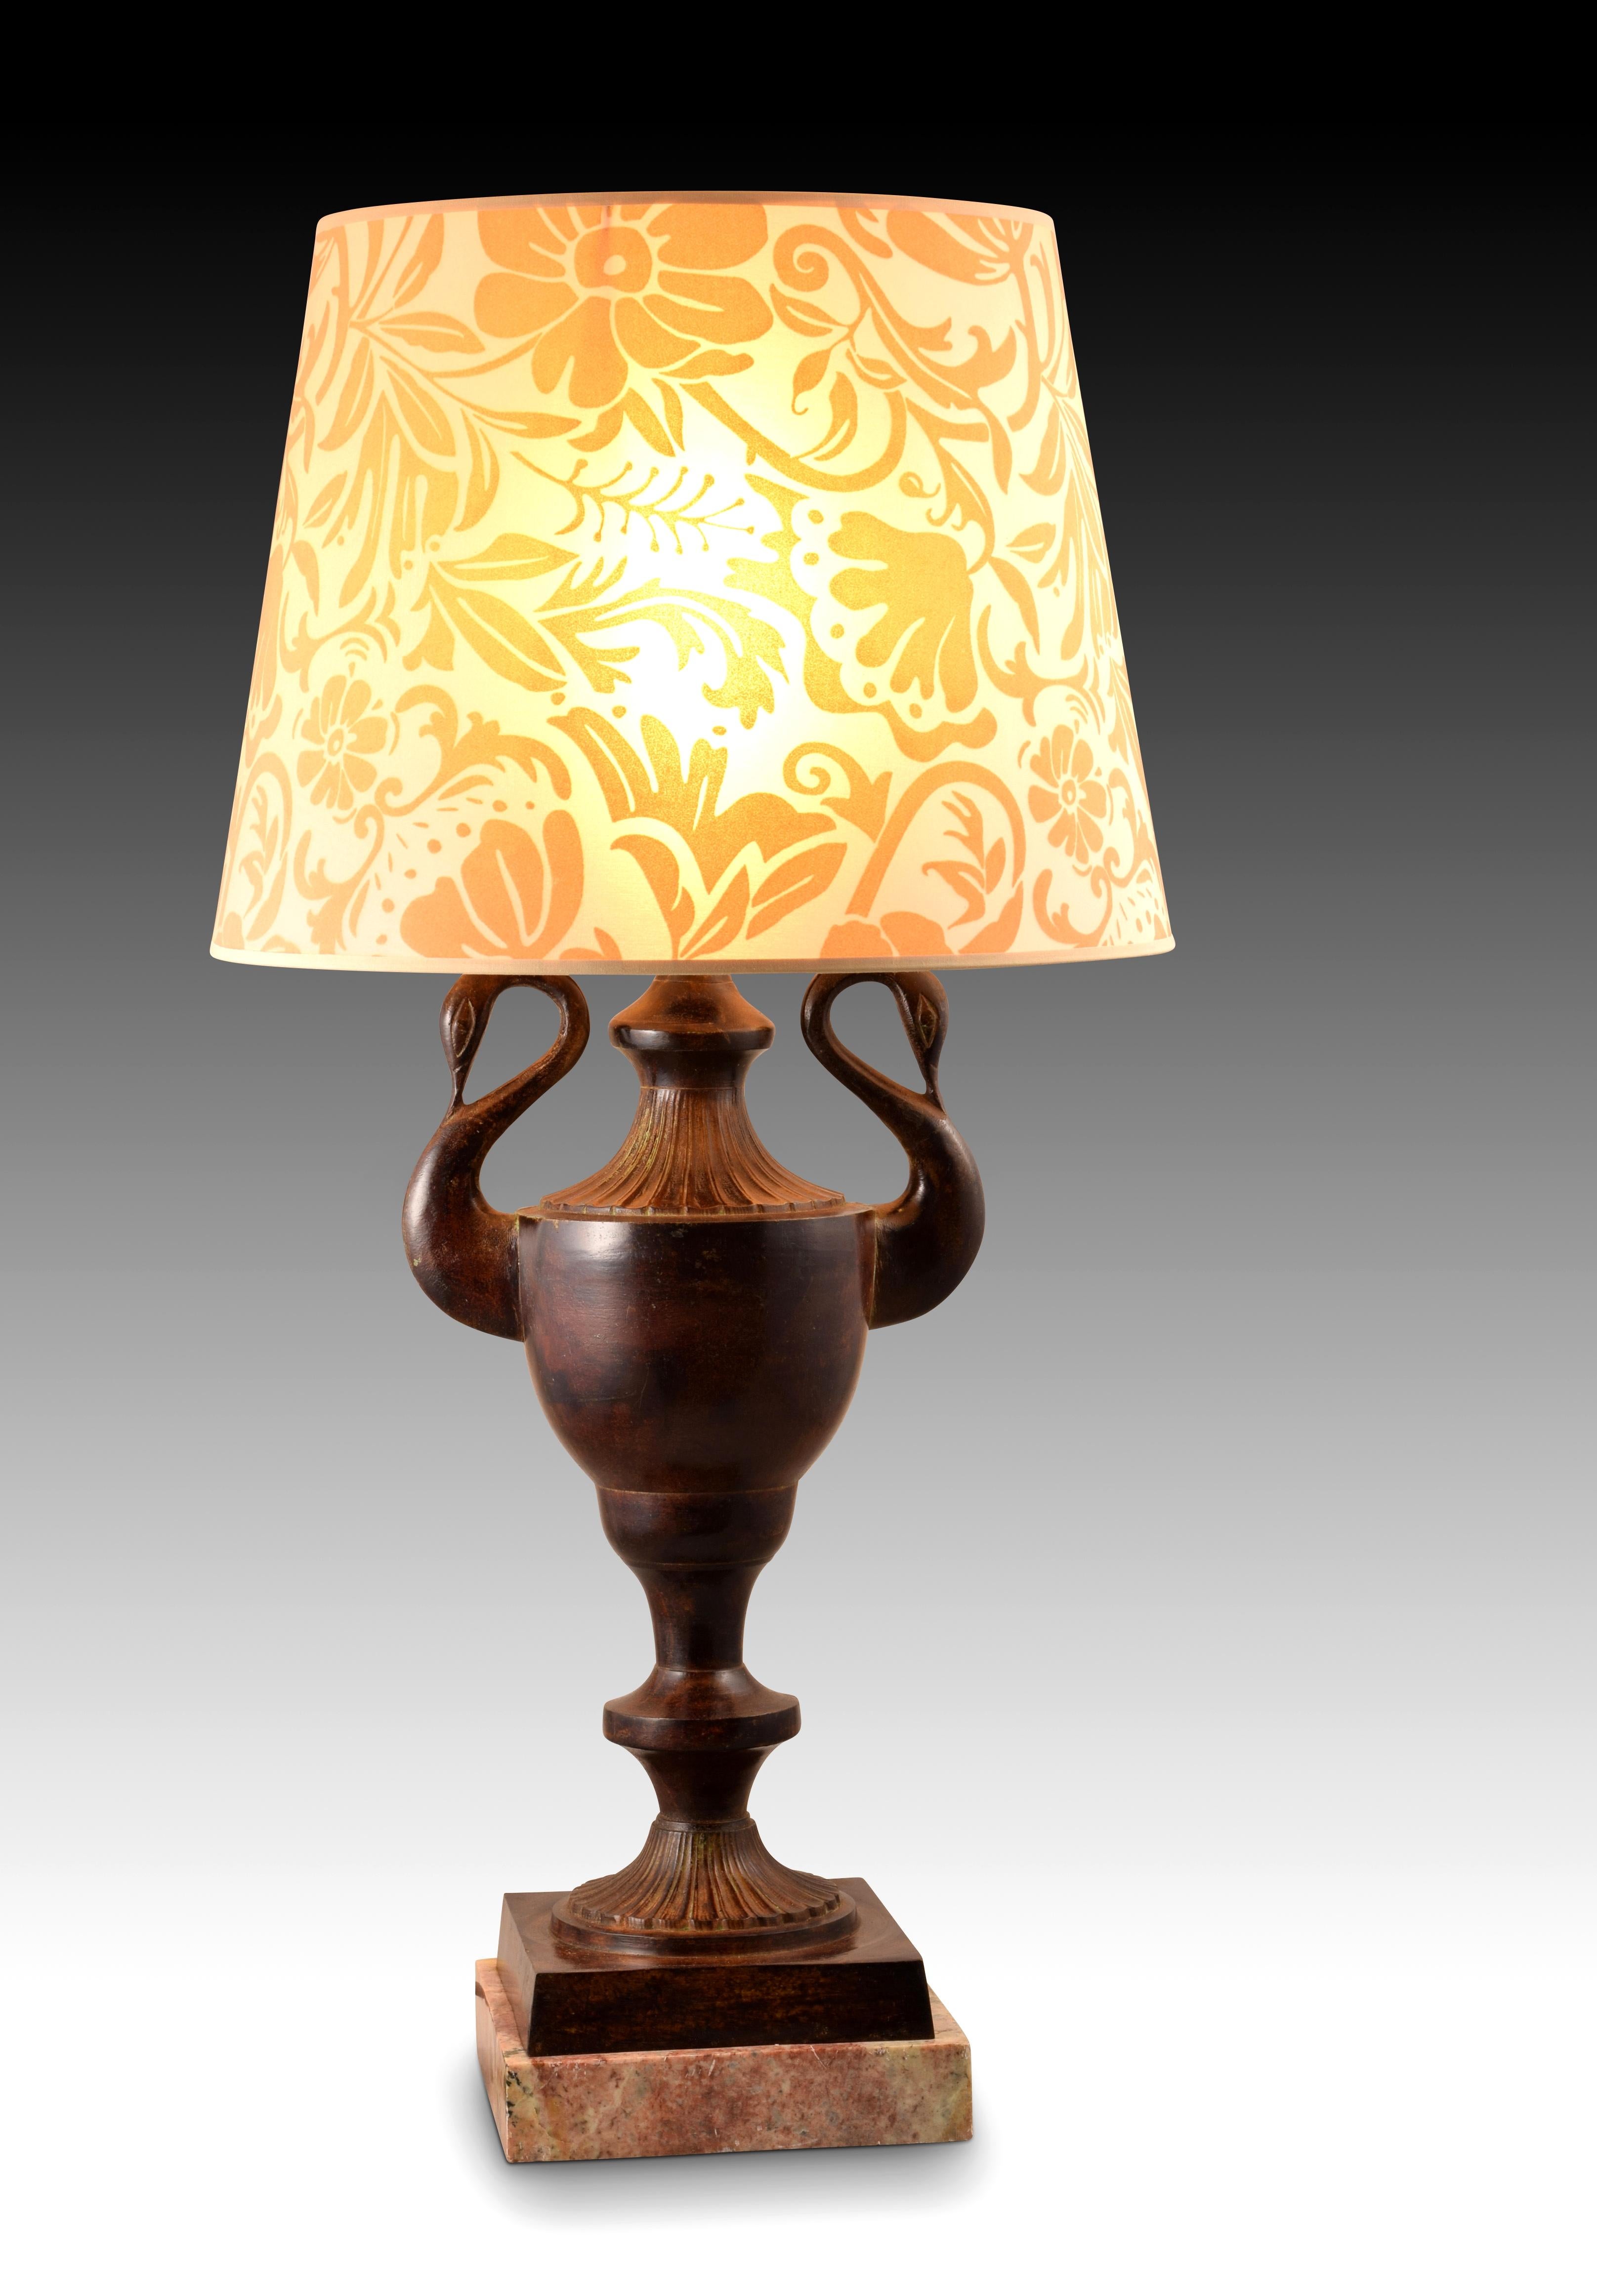 Empire style lamp (without shade).
 Patinated bronze. marble base Table lamp raised on a marble base, has a vase shape with simplified swan head handles, following examples from the 19th century.